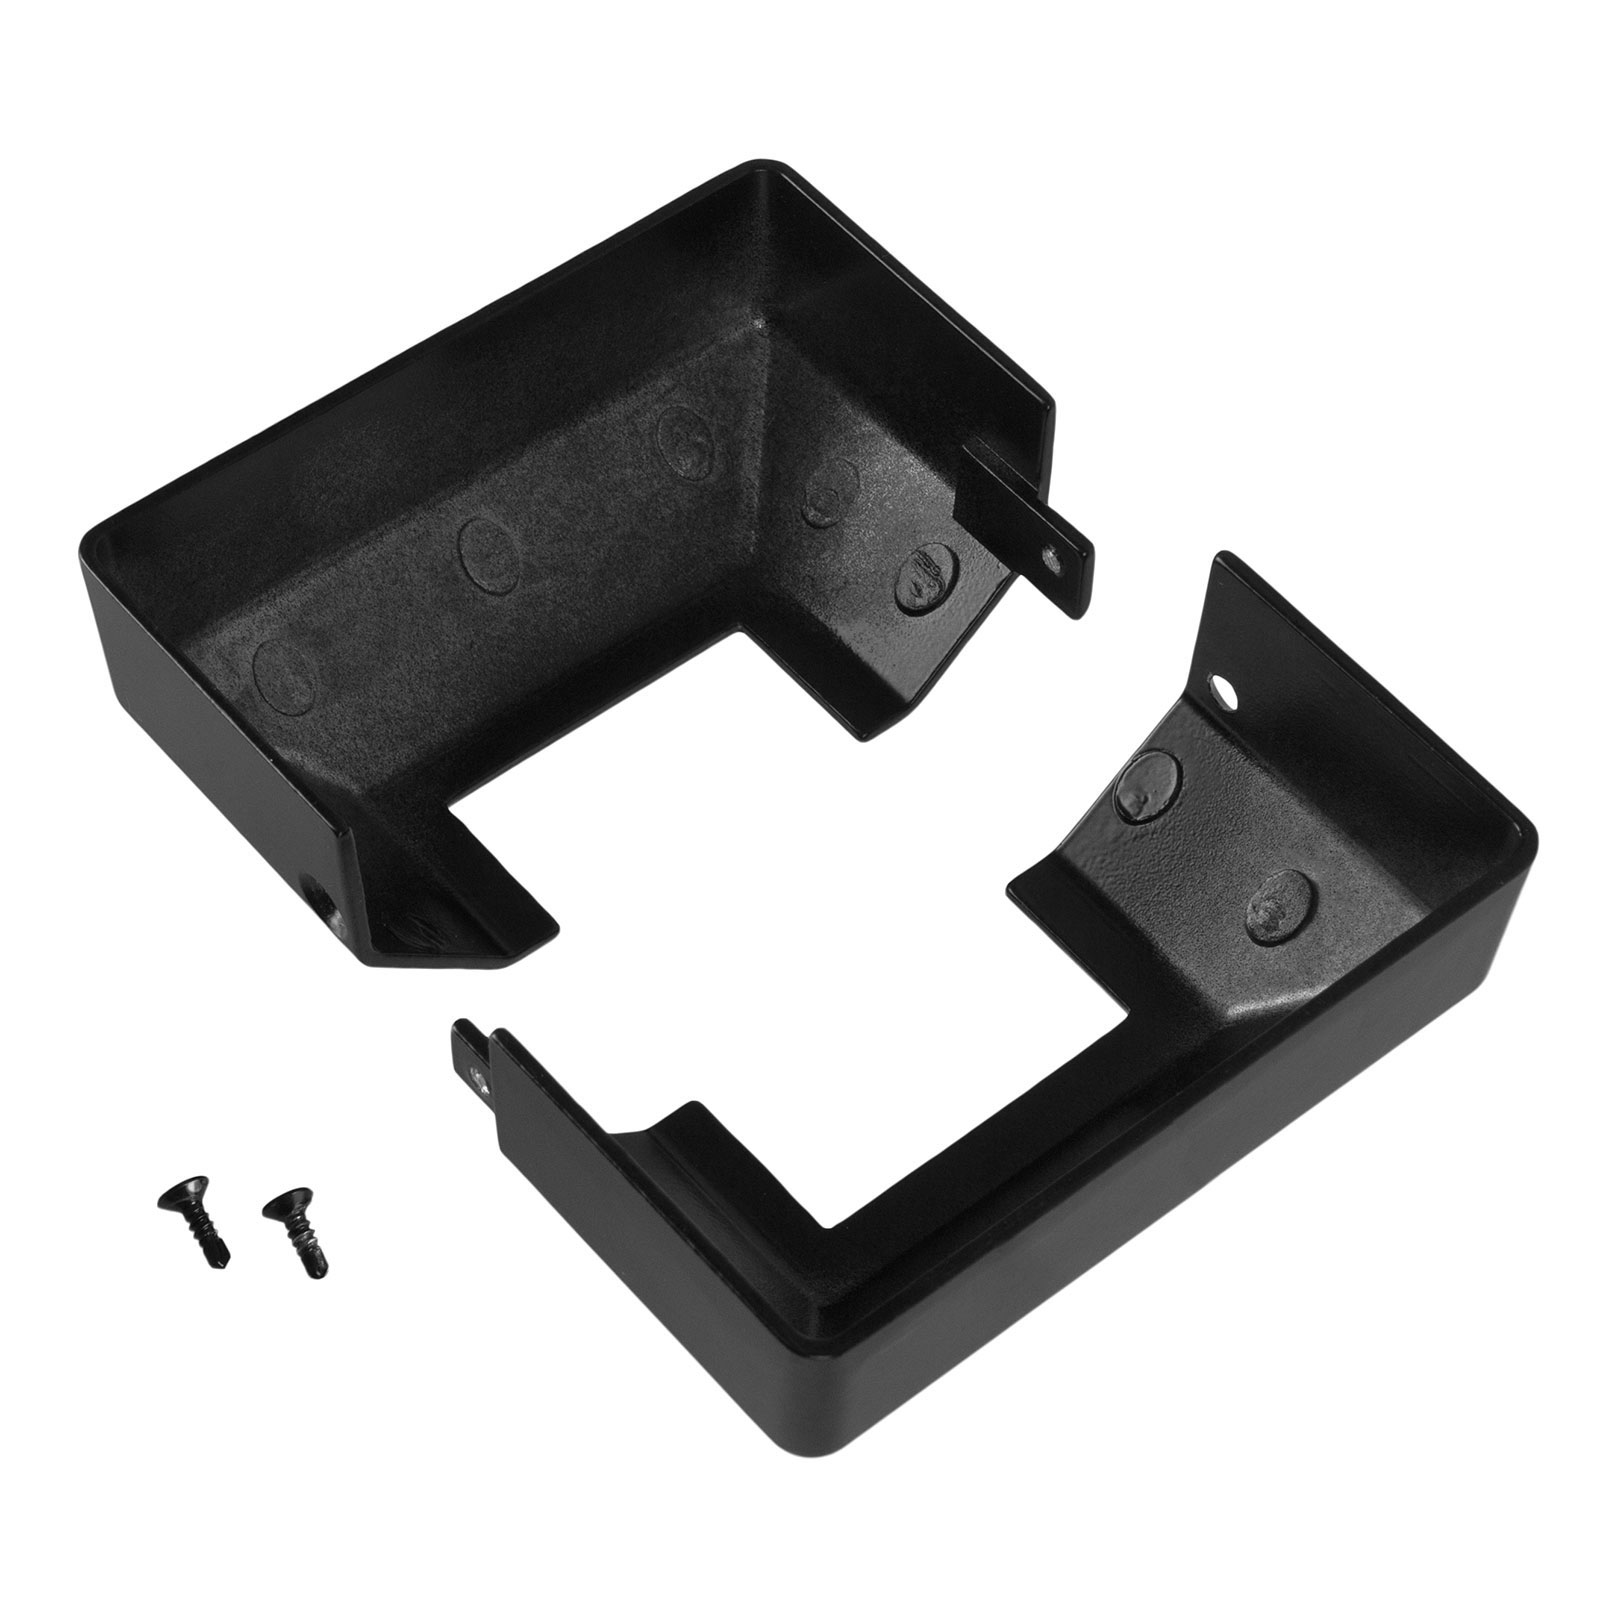 2 Piece Cover Plate for 2 1/2 Inch Square Floor Flange